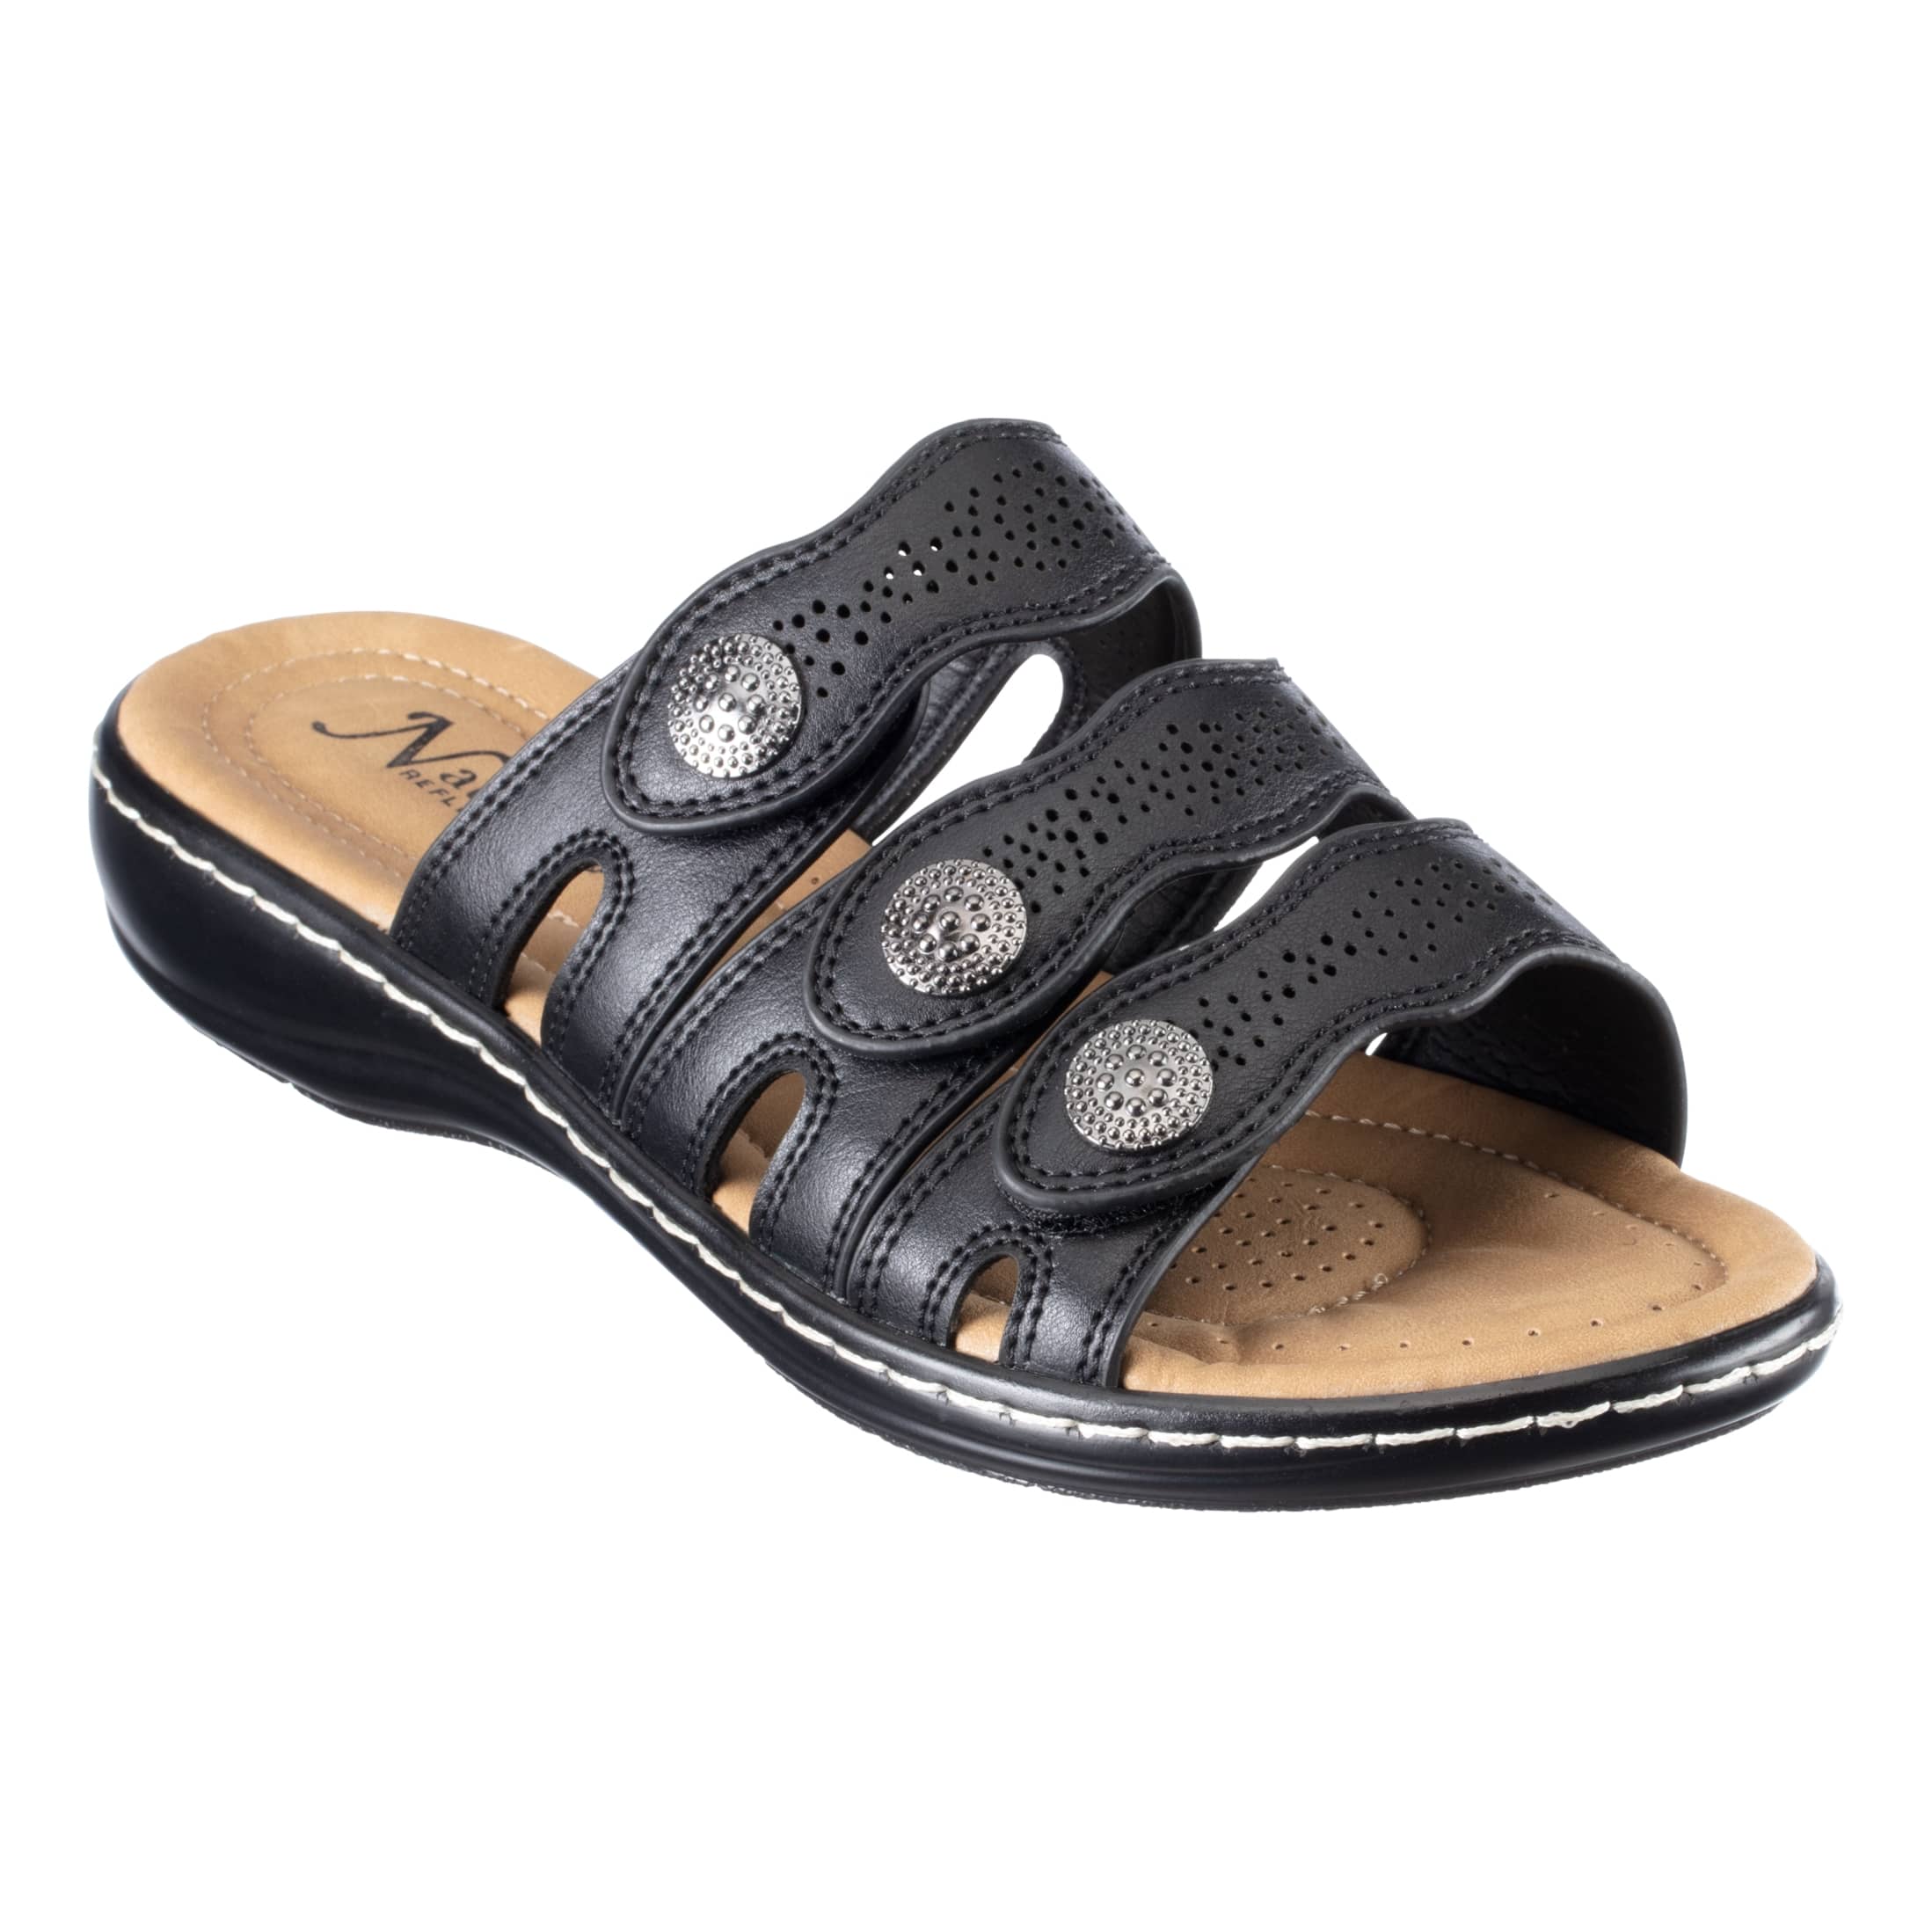 Natural Reflections® Women’s Cami II Wedge Sandals - Black